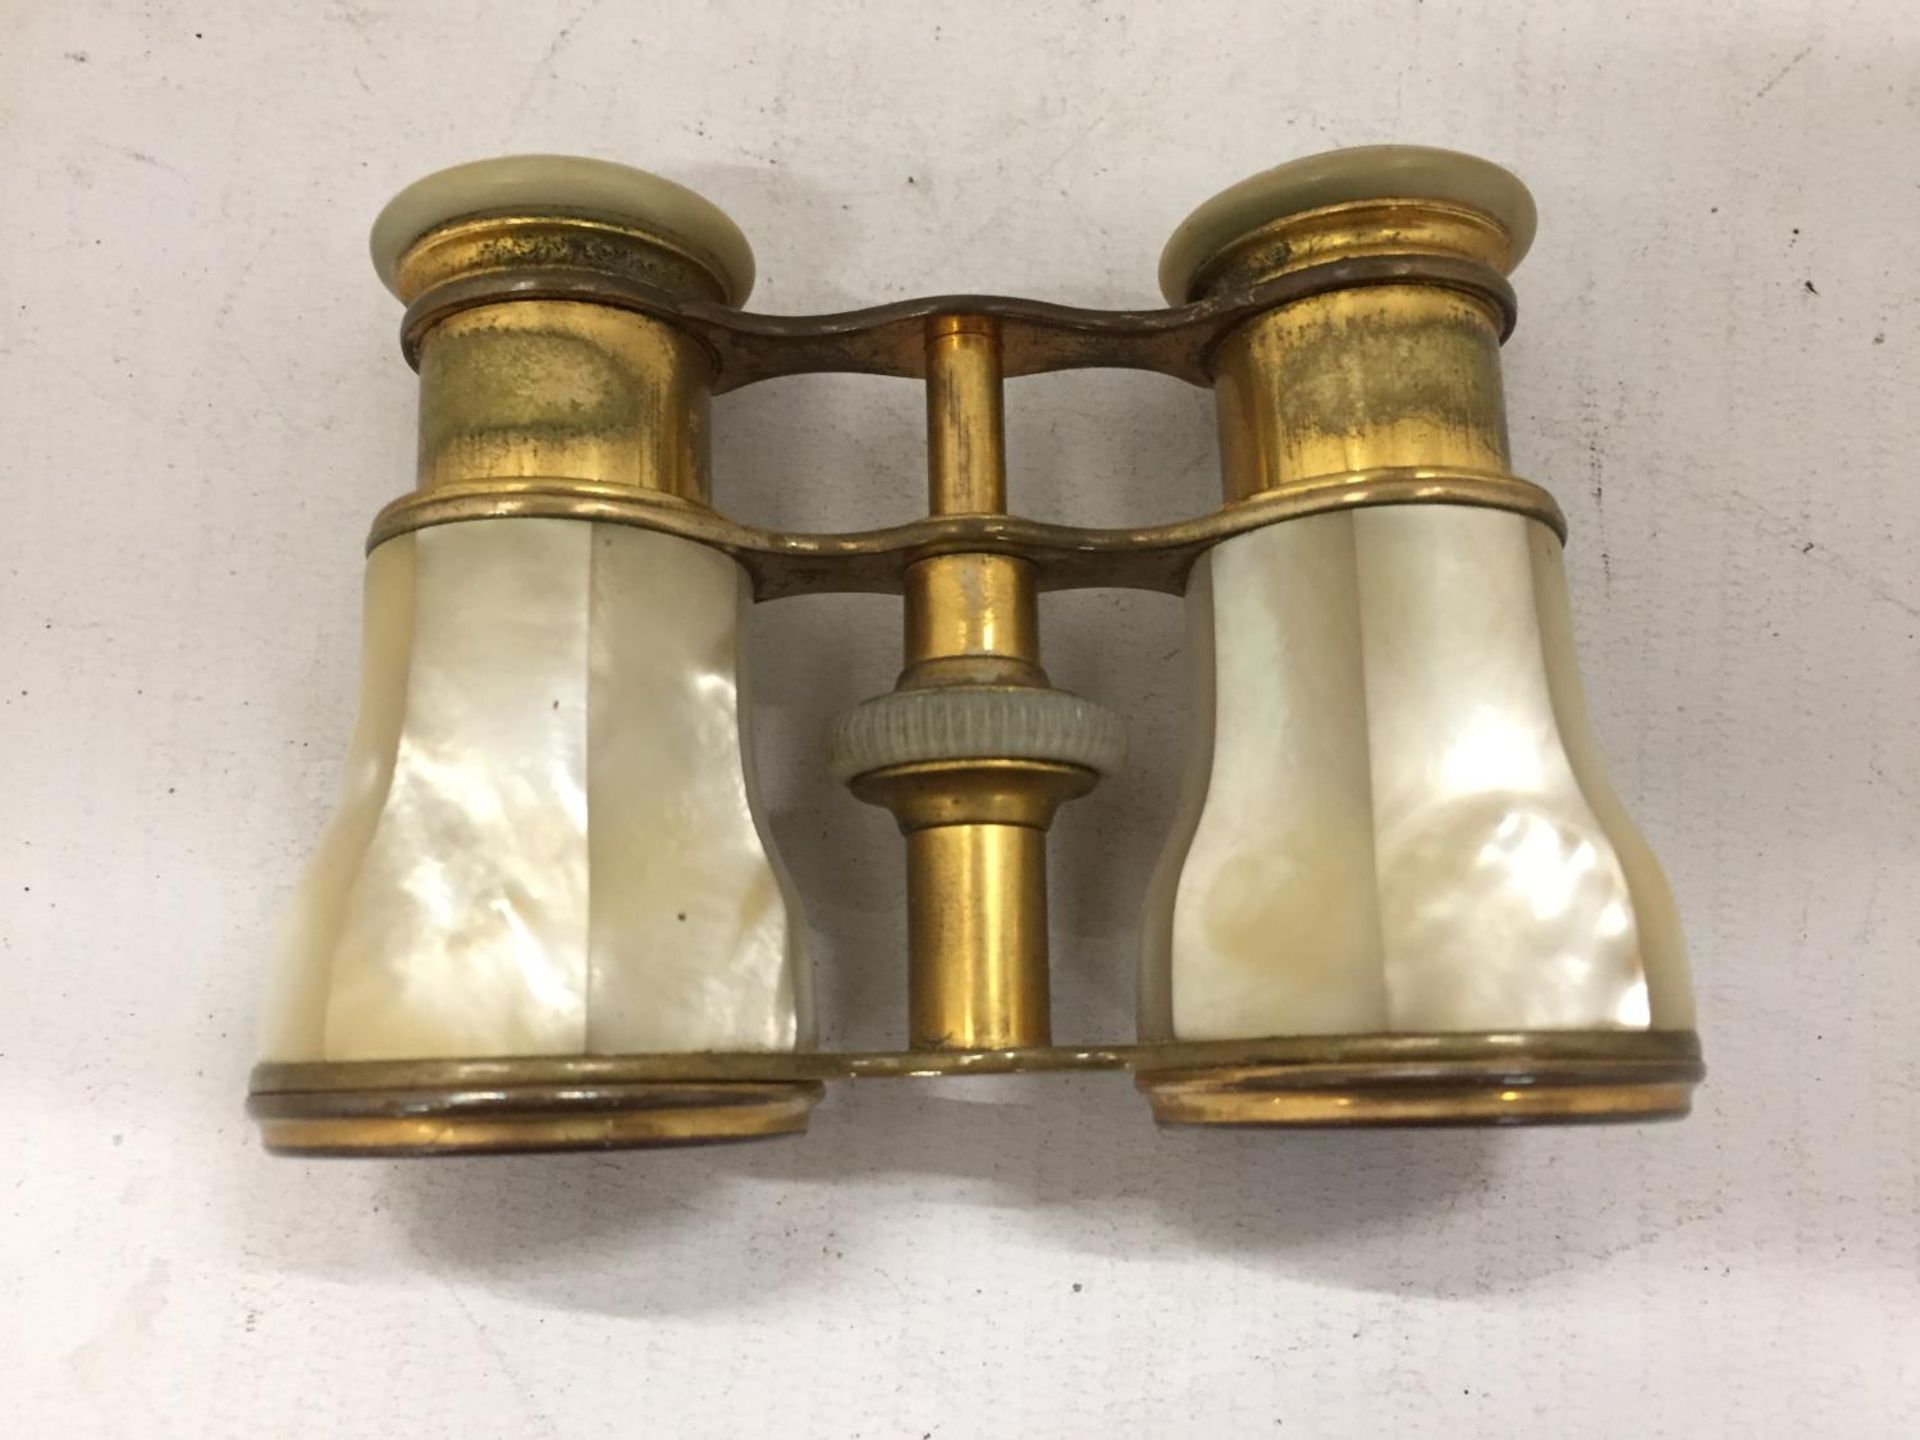 A PAIR OF MOTHER OF PEARL OPERA GLASSES - Image 2 of 3